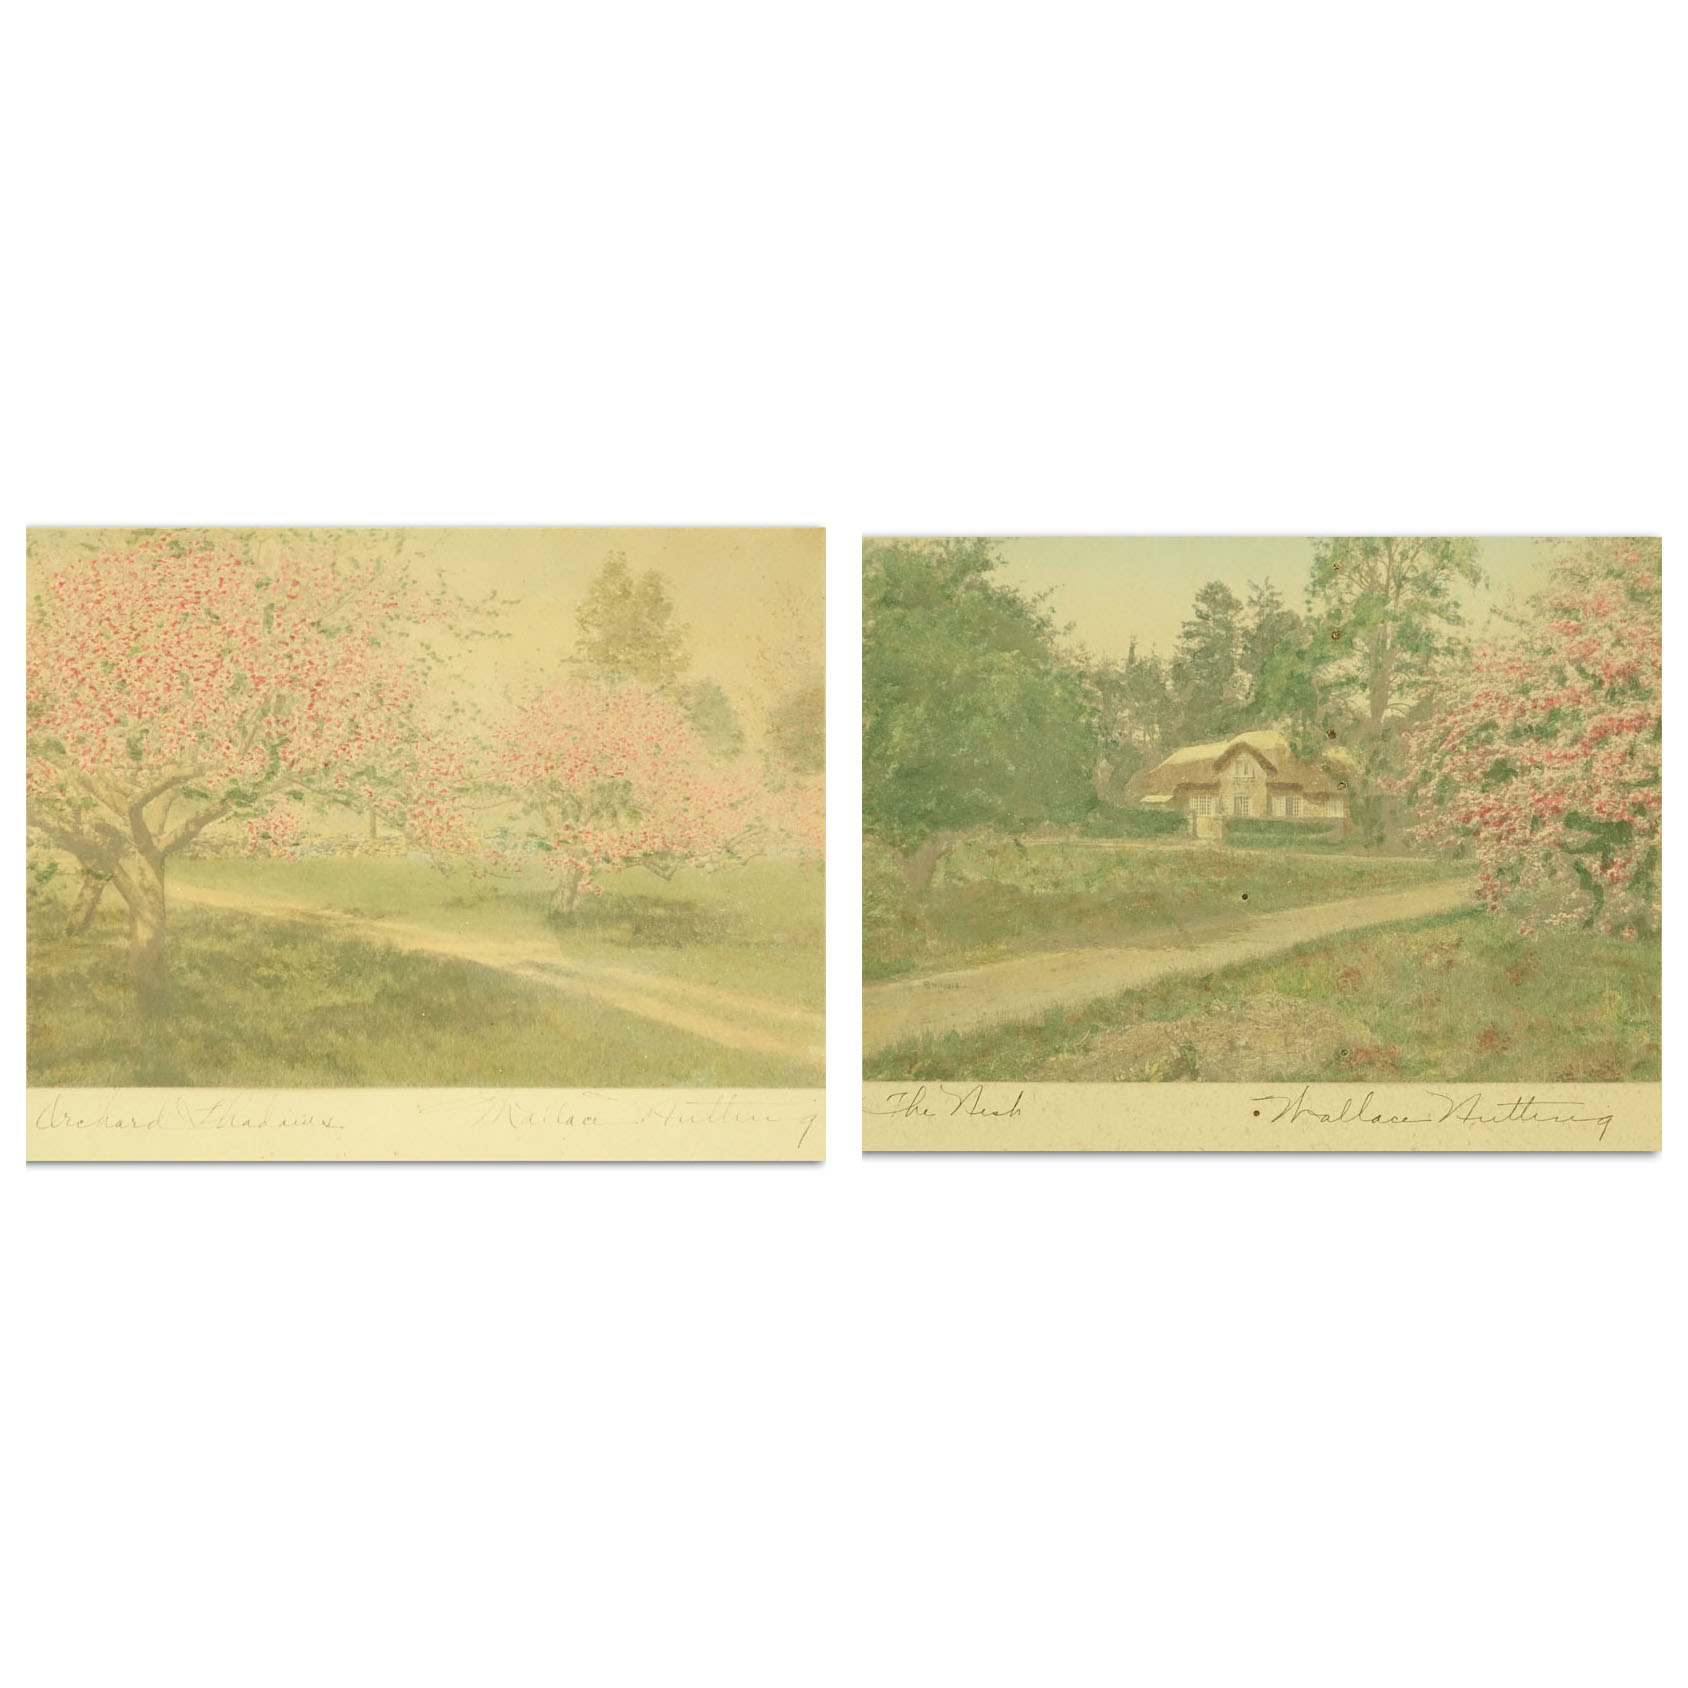 Wallace Nutting, American  (1861 - 1941) Two prints "Orchard Shadows", "The Nest"